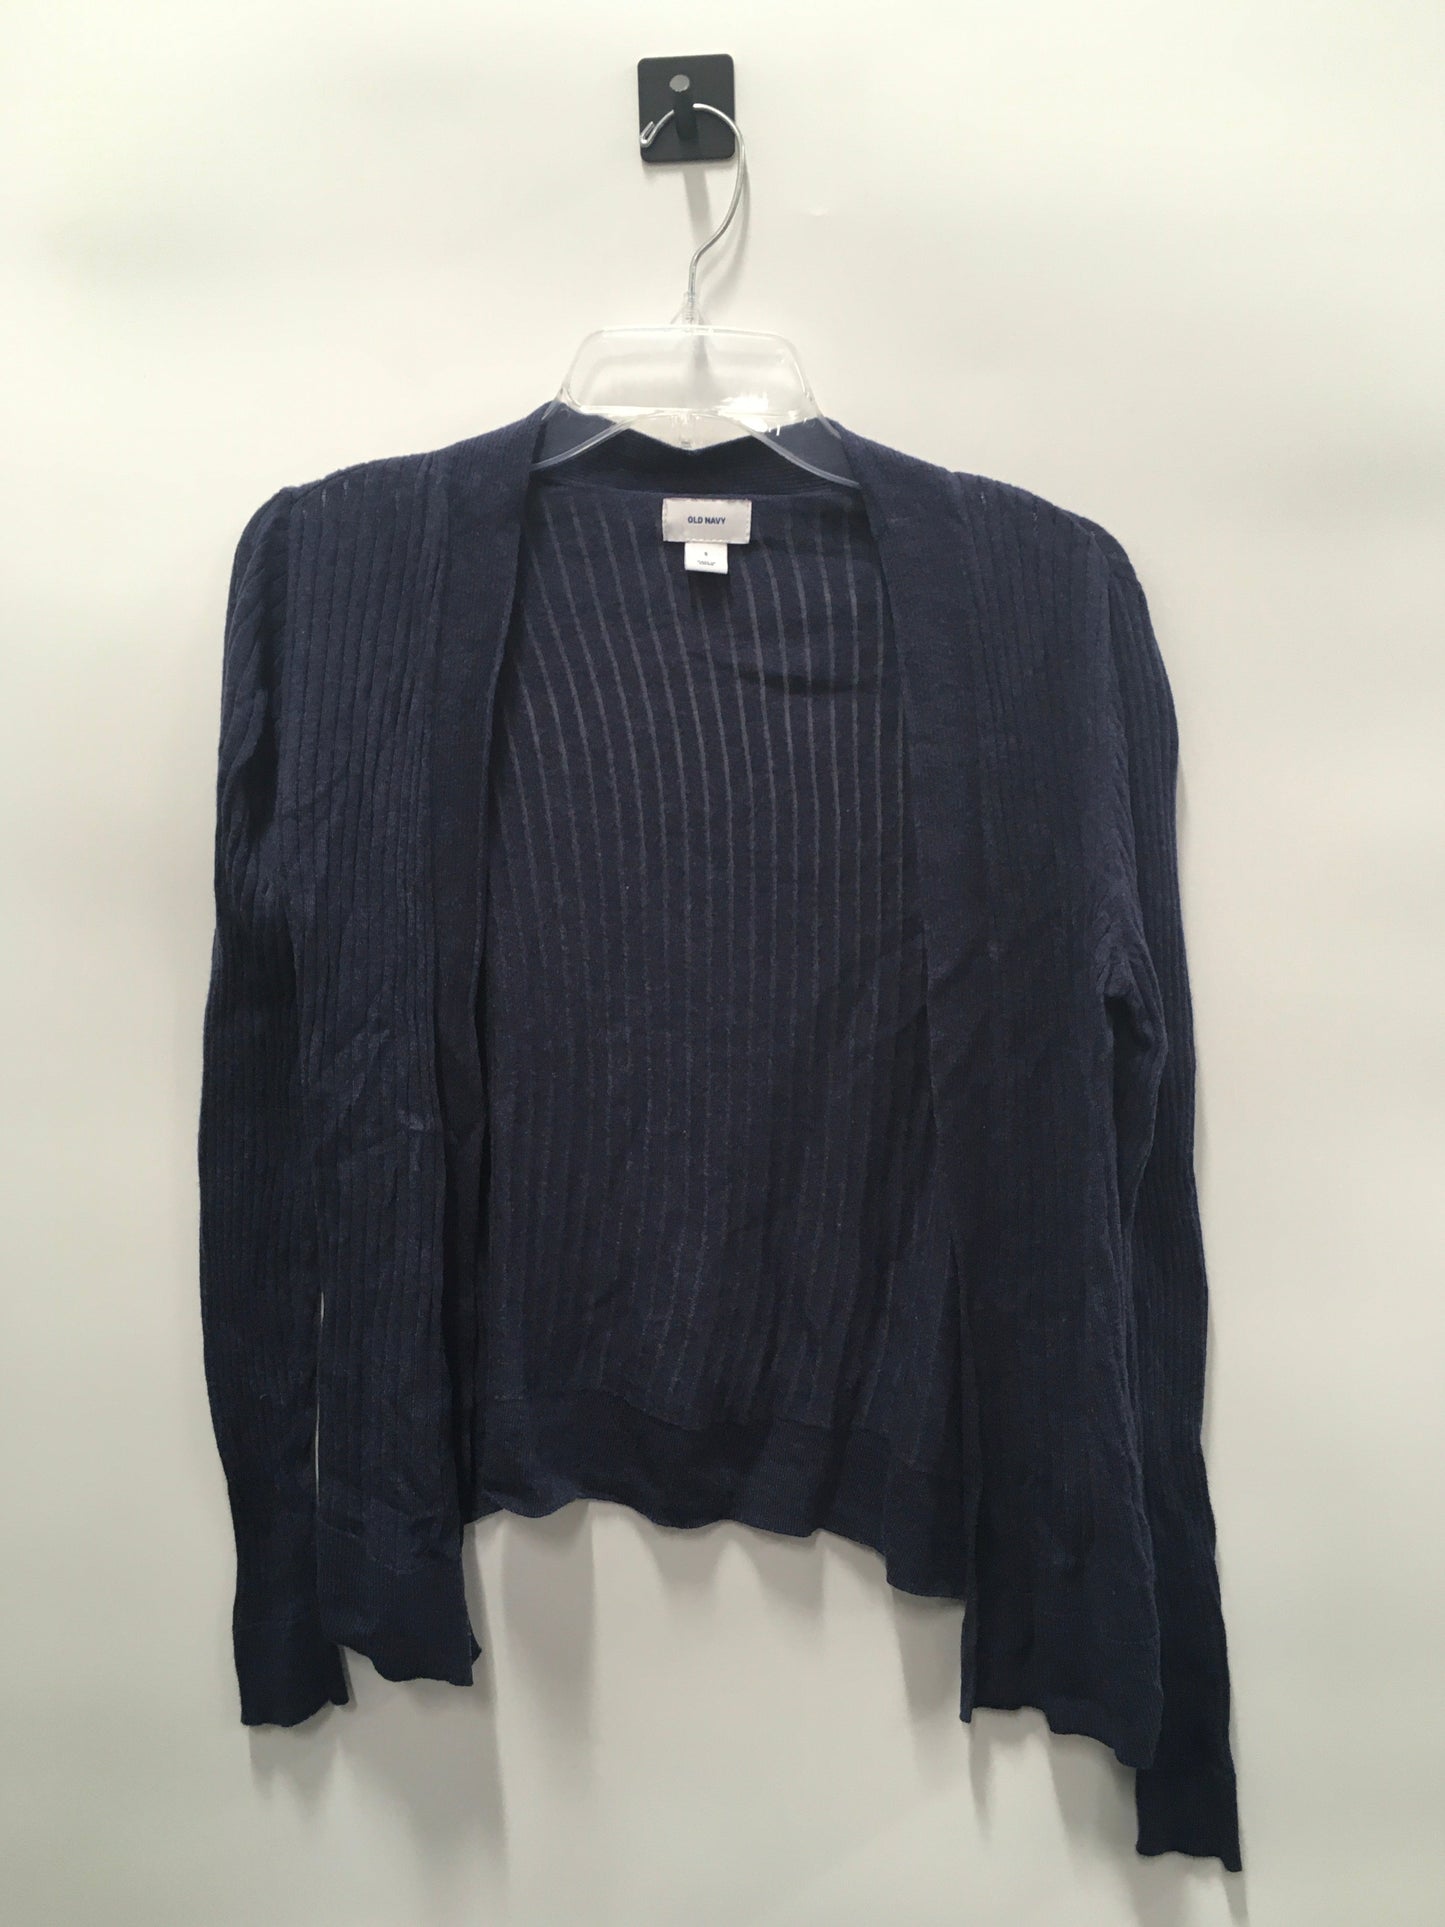 Blue Cardigan Old Navy, Size S